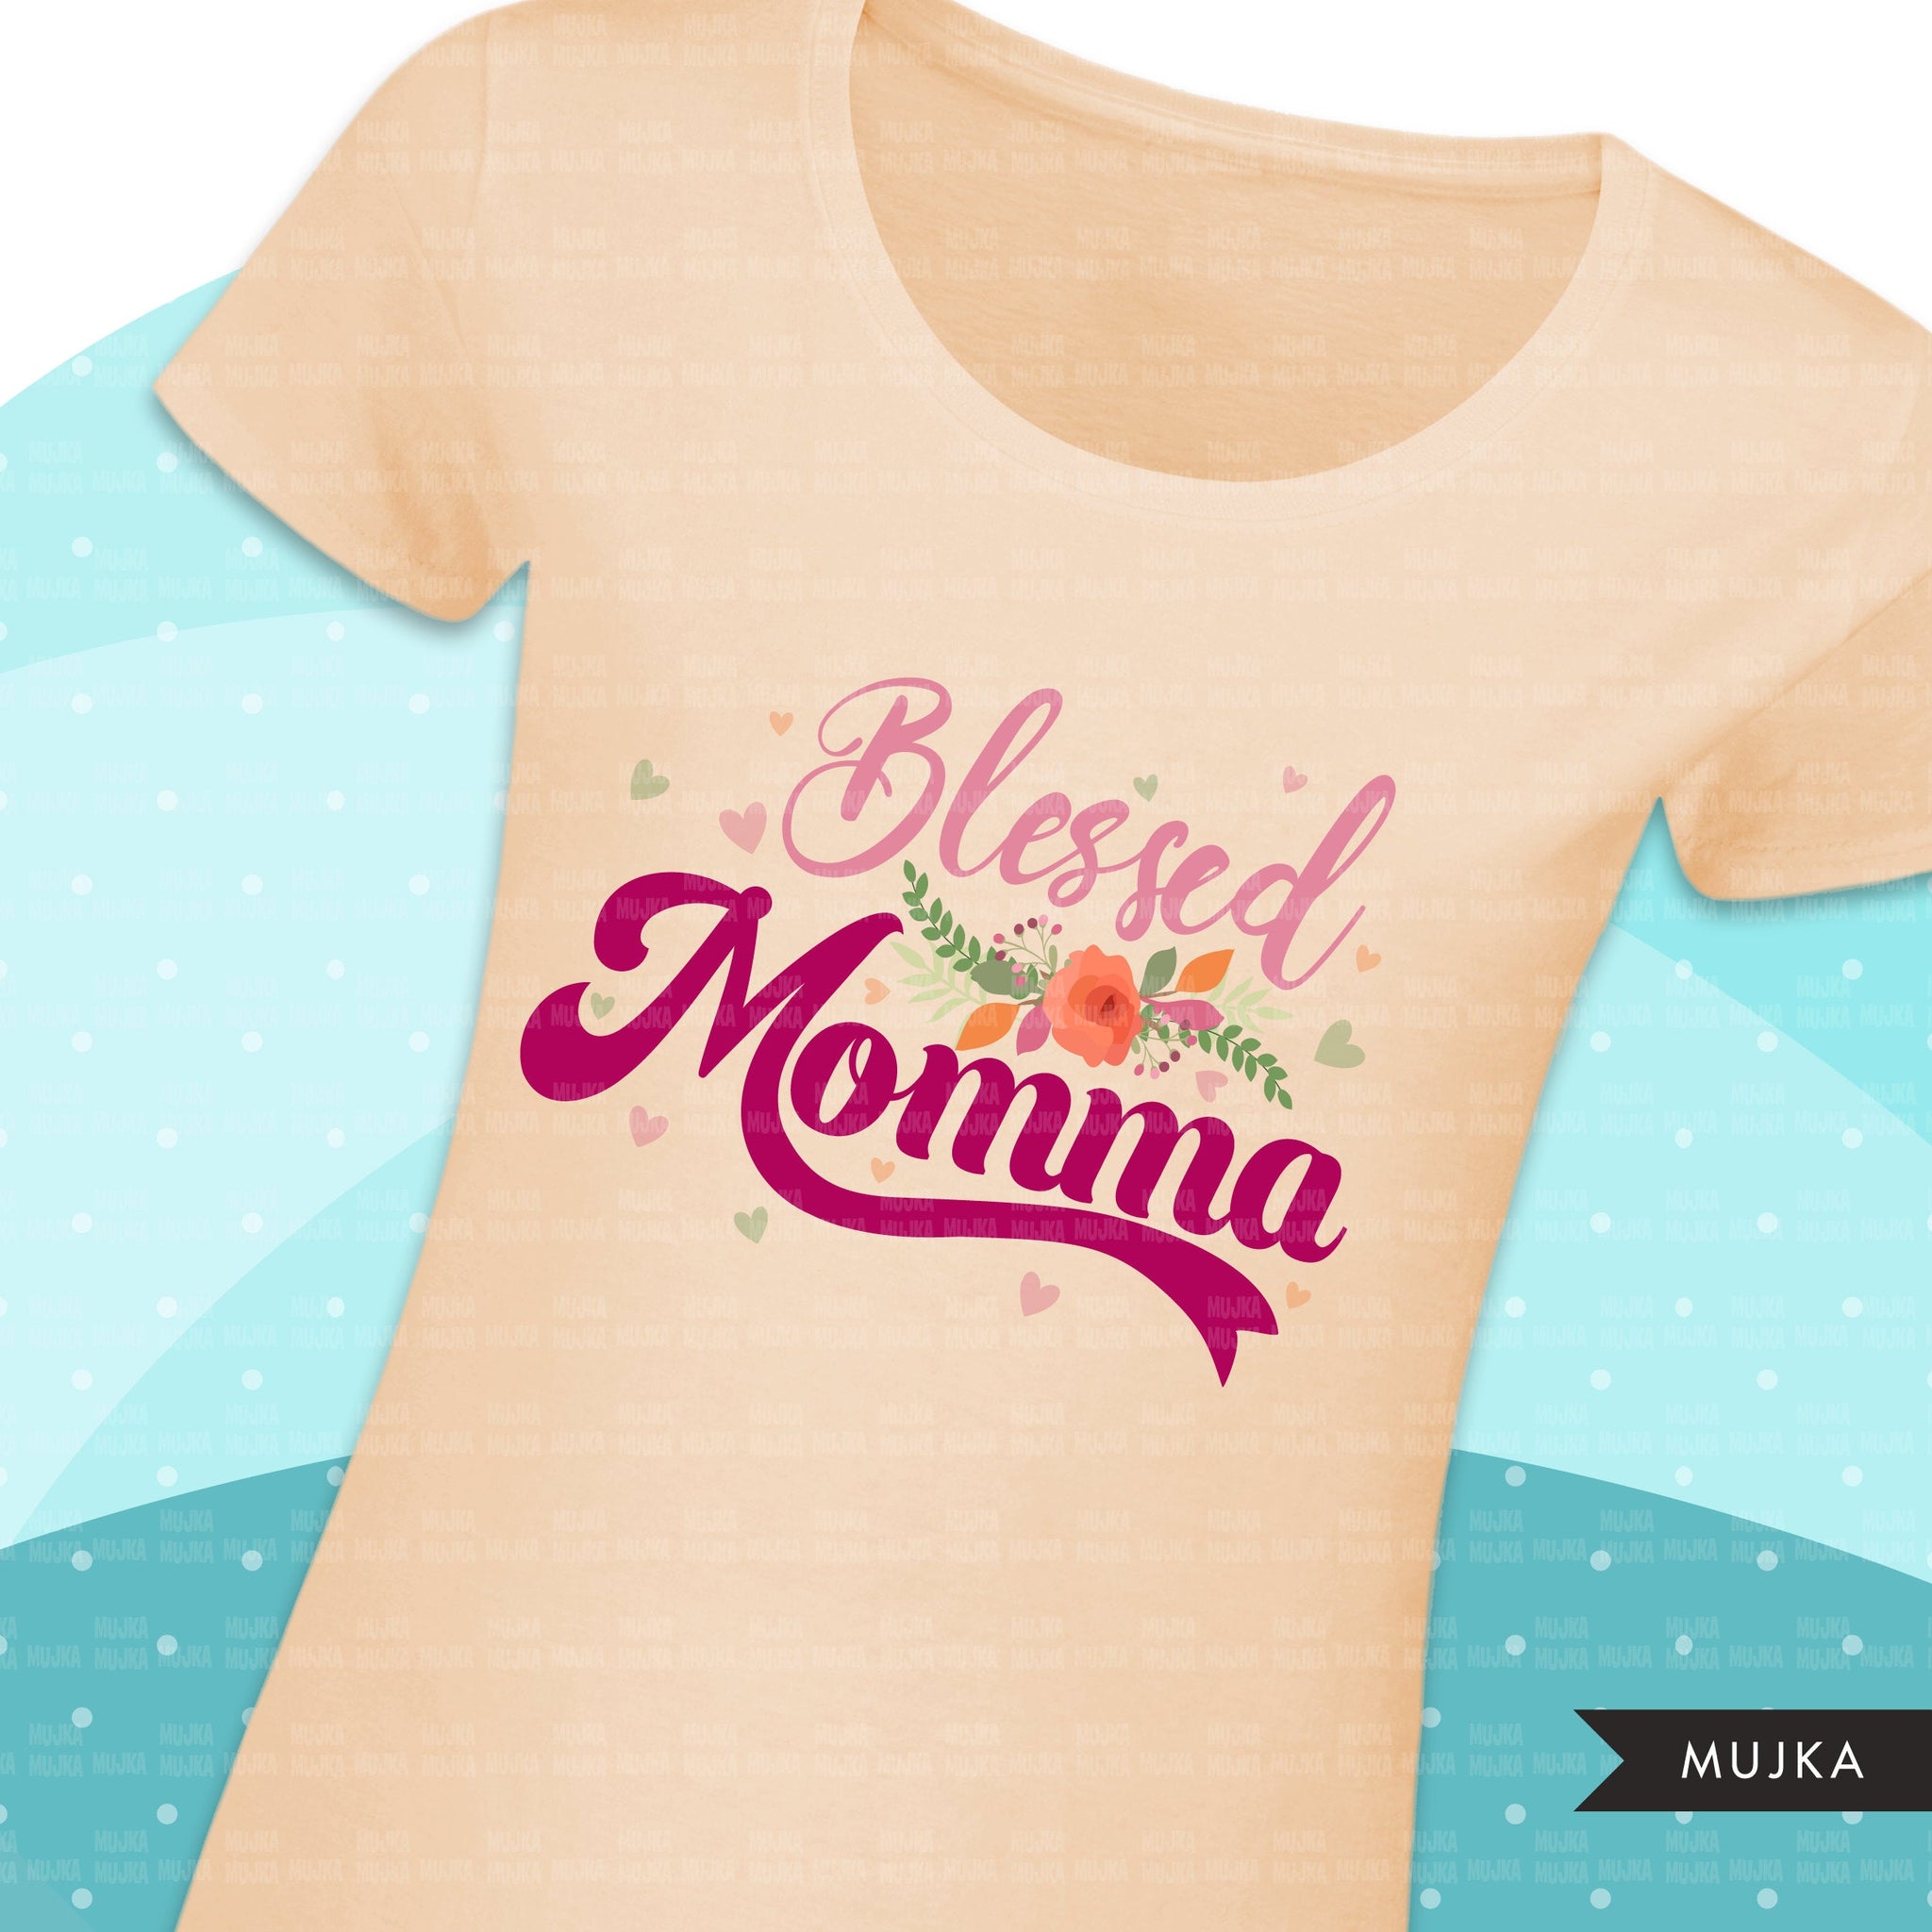 Blessed Momma clipart, blessed mom sublimation designs digital download, blessed mom Shirt designs, mothers day designs for cricut downloads